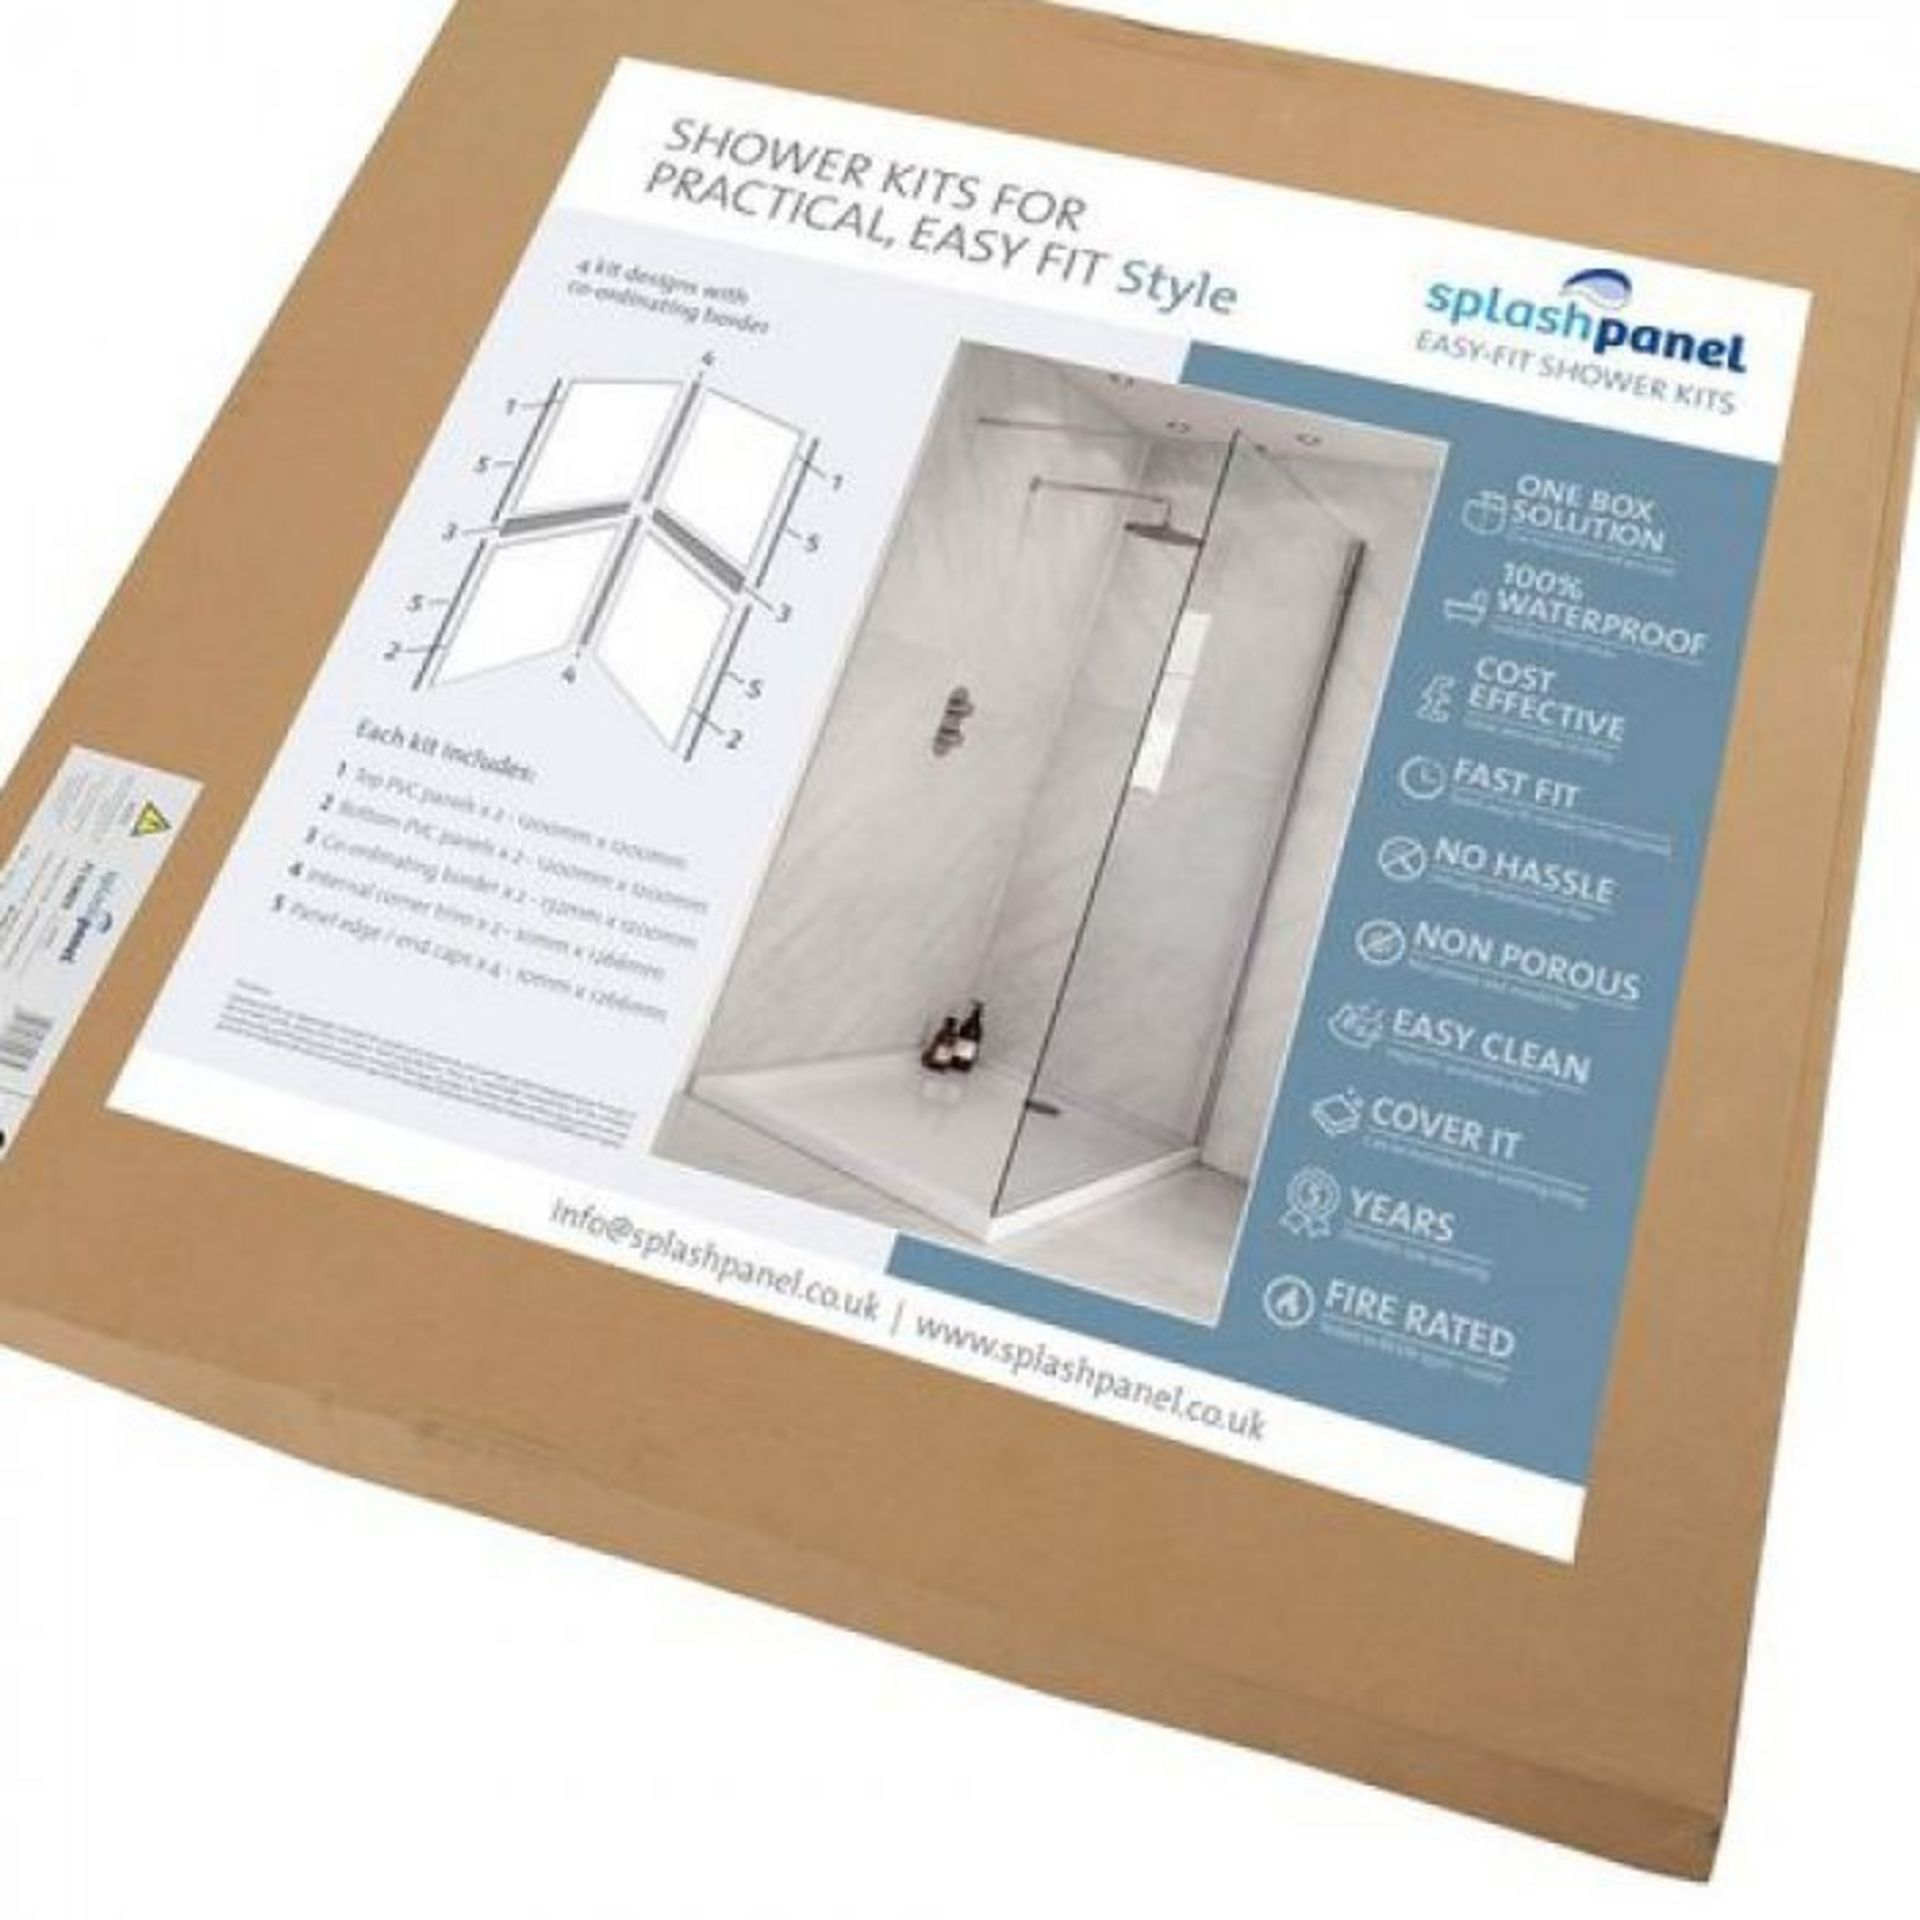 Pallet of 12x Sand stone Matt Splash Panel Shower kits, all brand new, RRP £175, please see pictures - Image 2 of 2